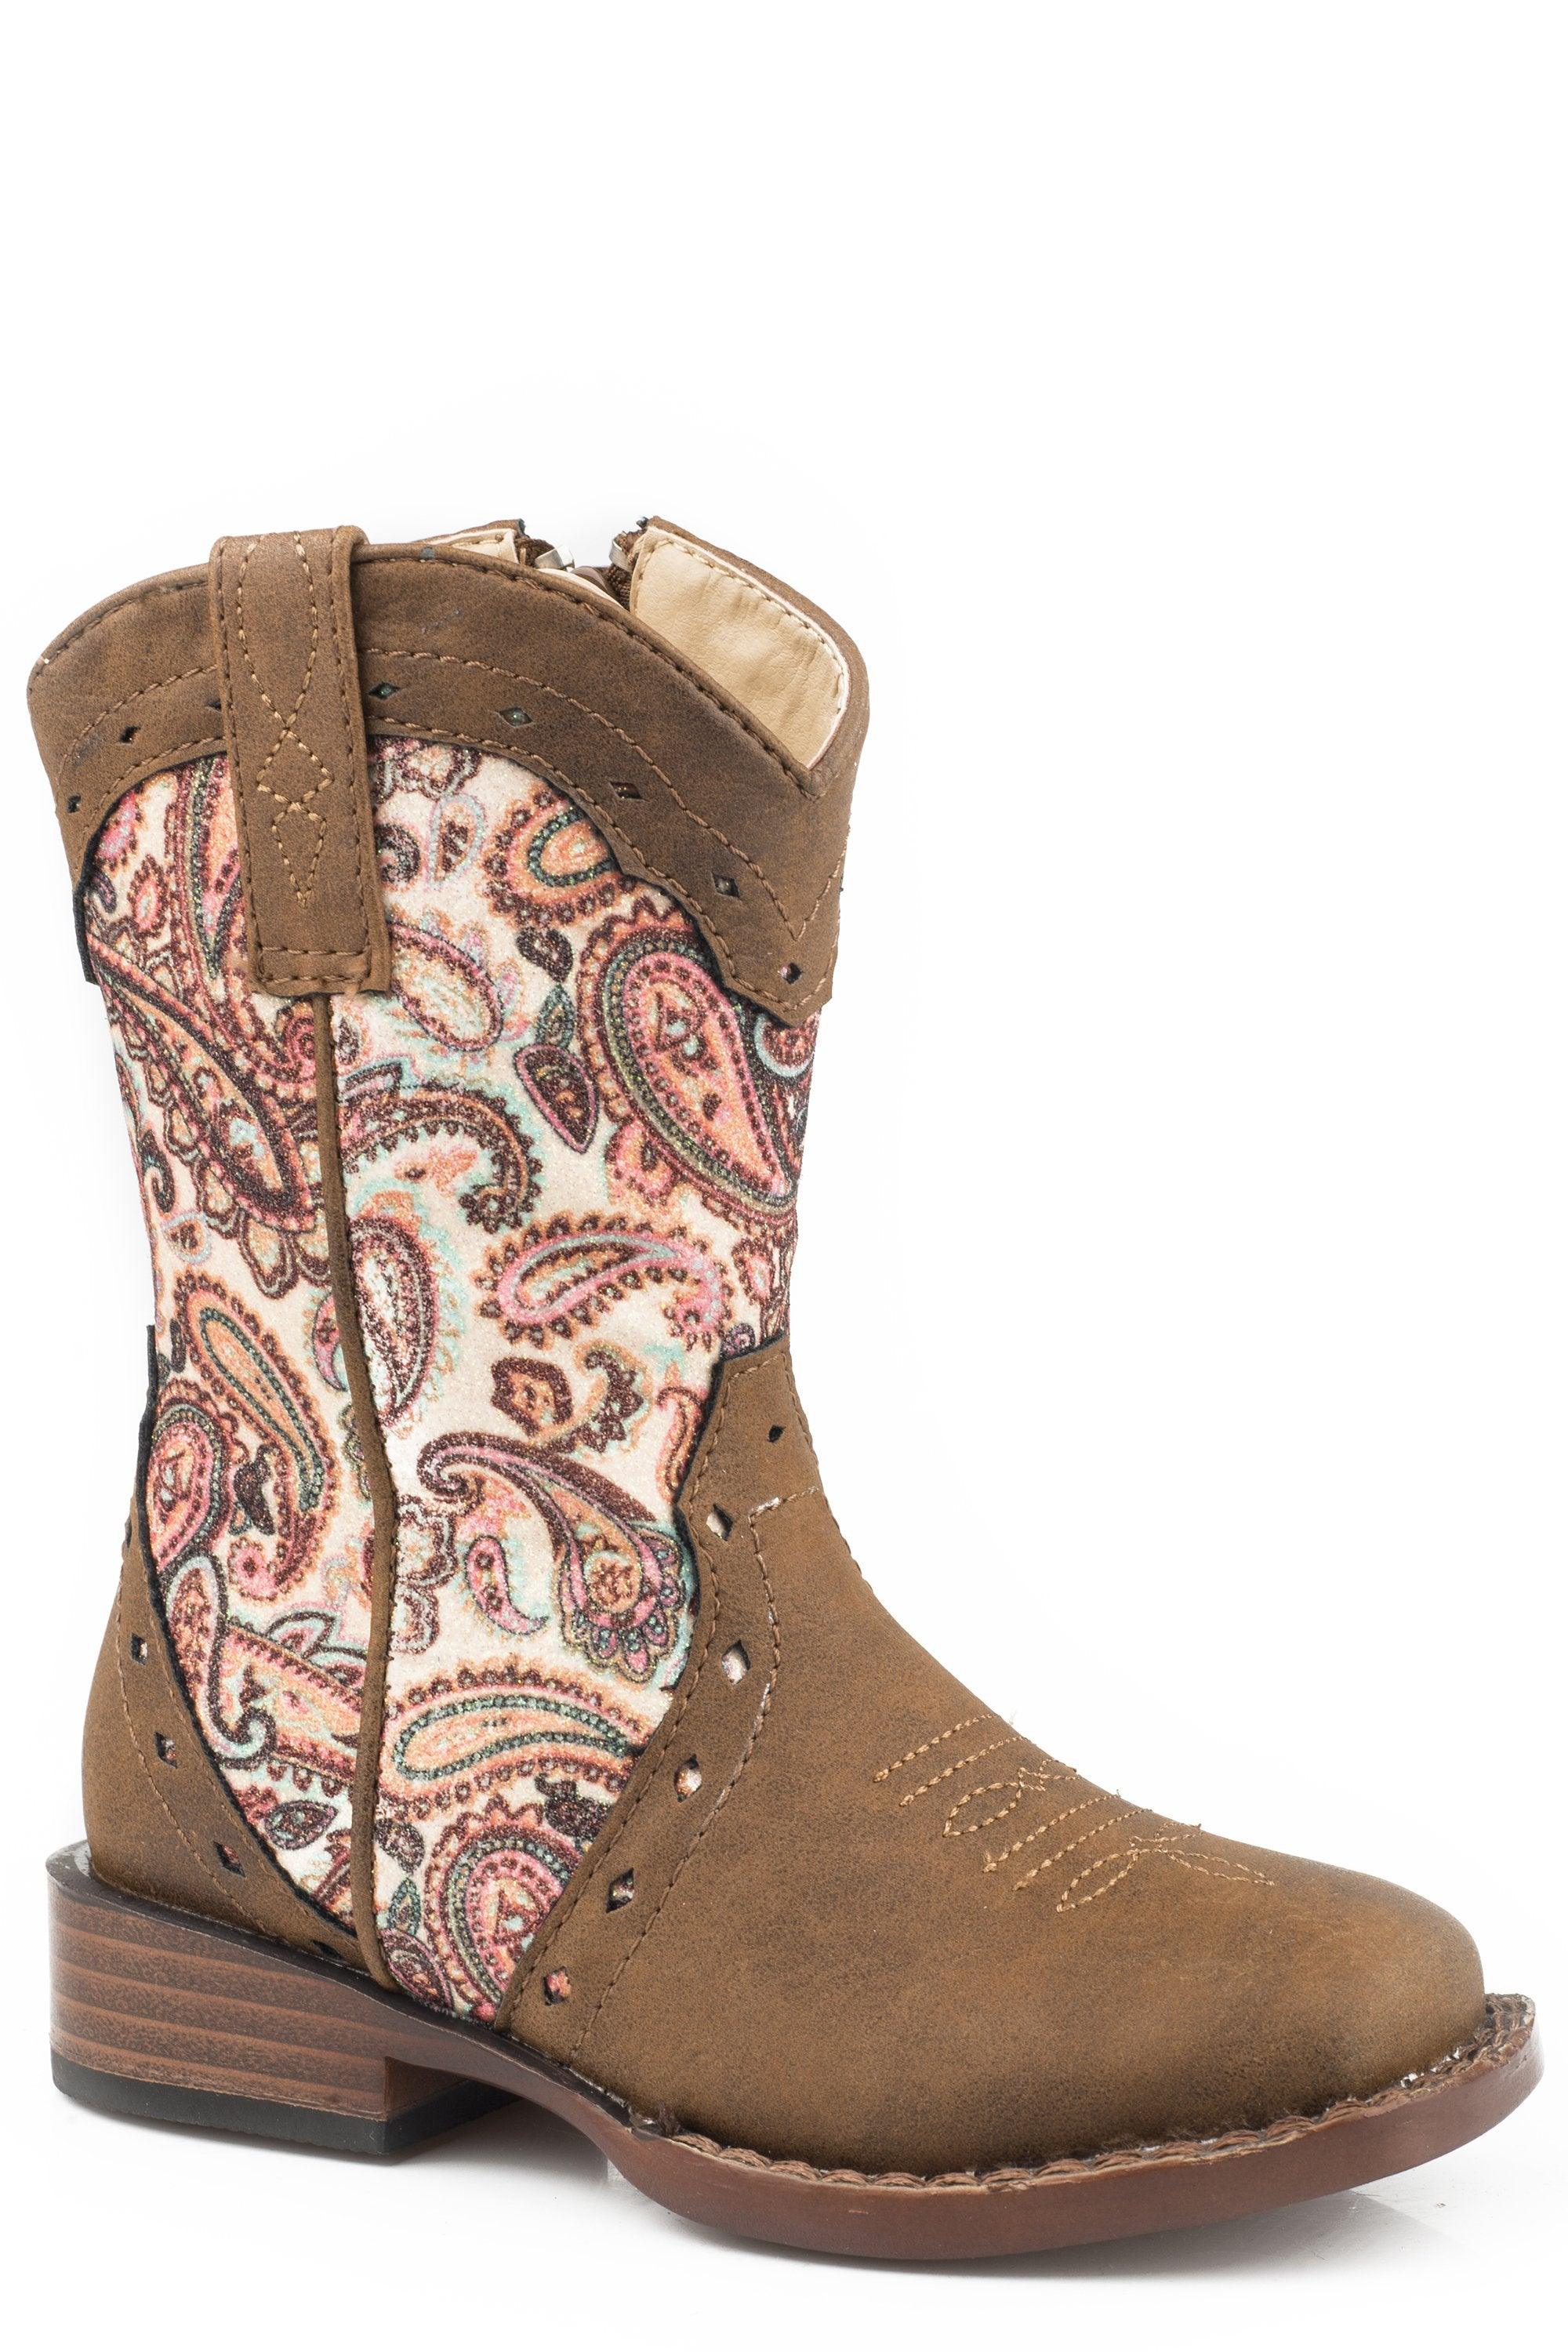 ROPER GIRLS TODDLER TRIAD DESIGN BROWN AND PAISLEY - Flyclothing LLC